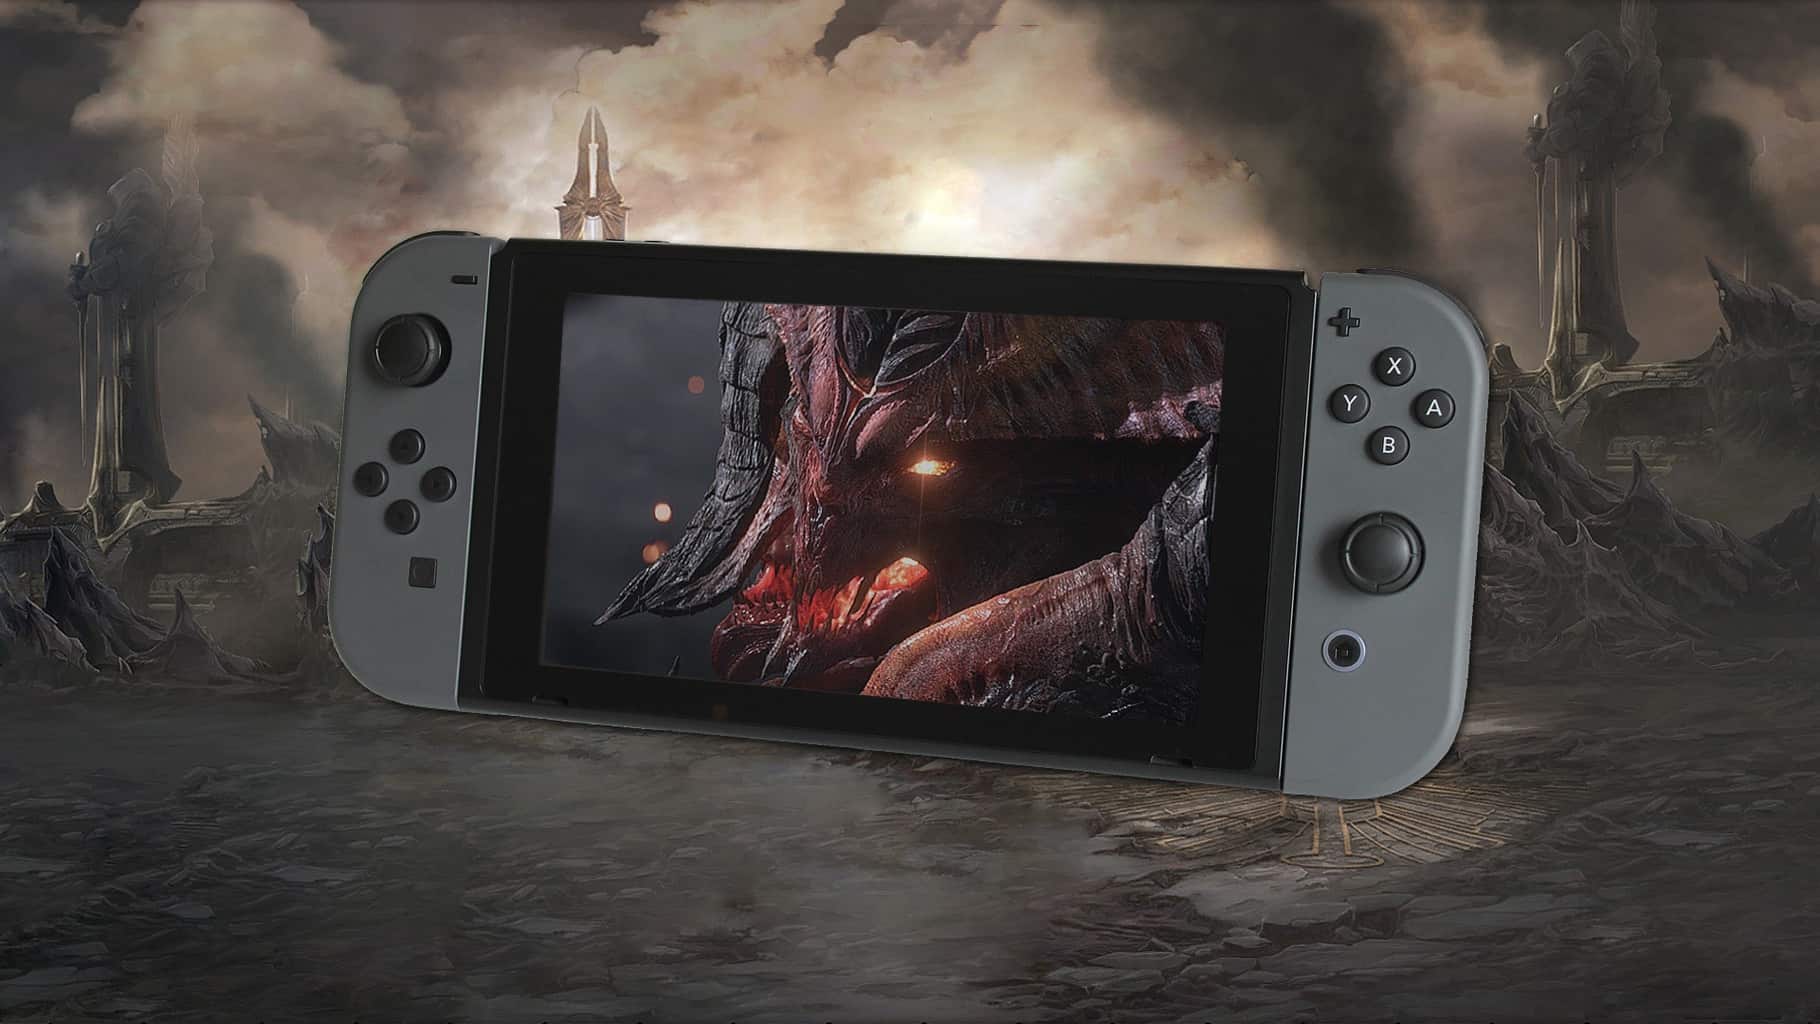 diablo 3 switch gameplay couch co op